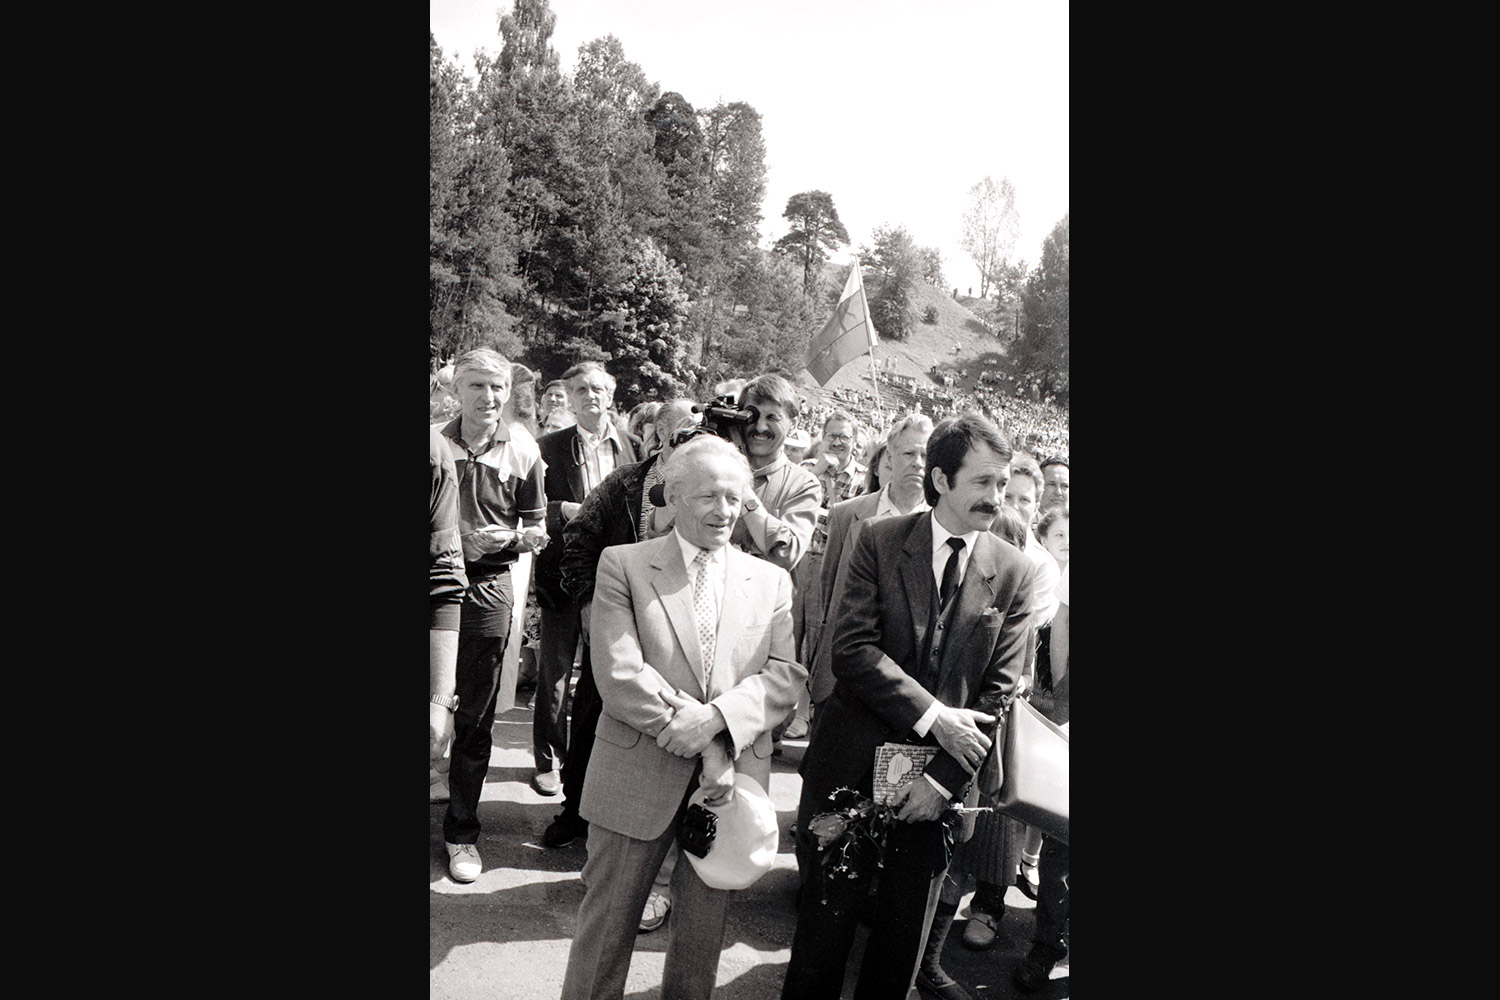 20/05/1989 – Rally in Kalnų Park – escort of newly elected USSR People’s Deputies to the first Congress in Moscow. LVCA, photographer: Jonas Juknevičius.